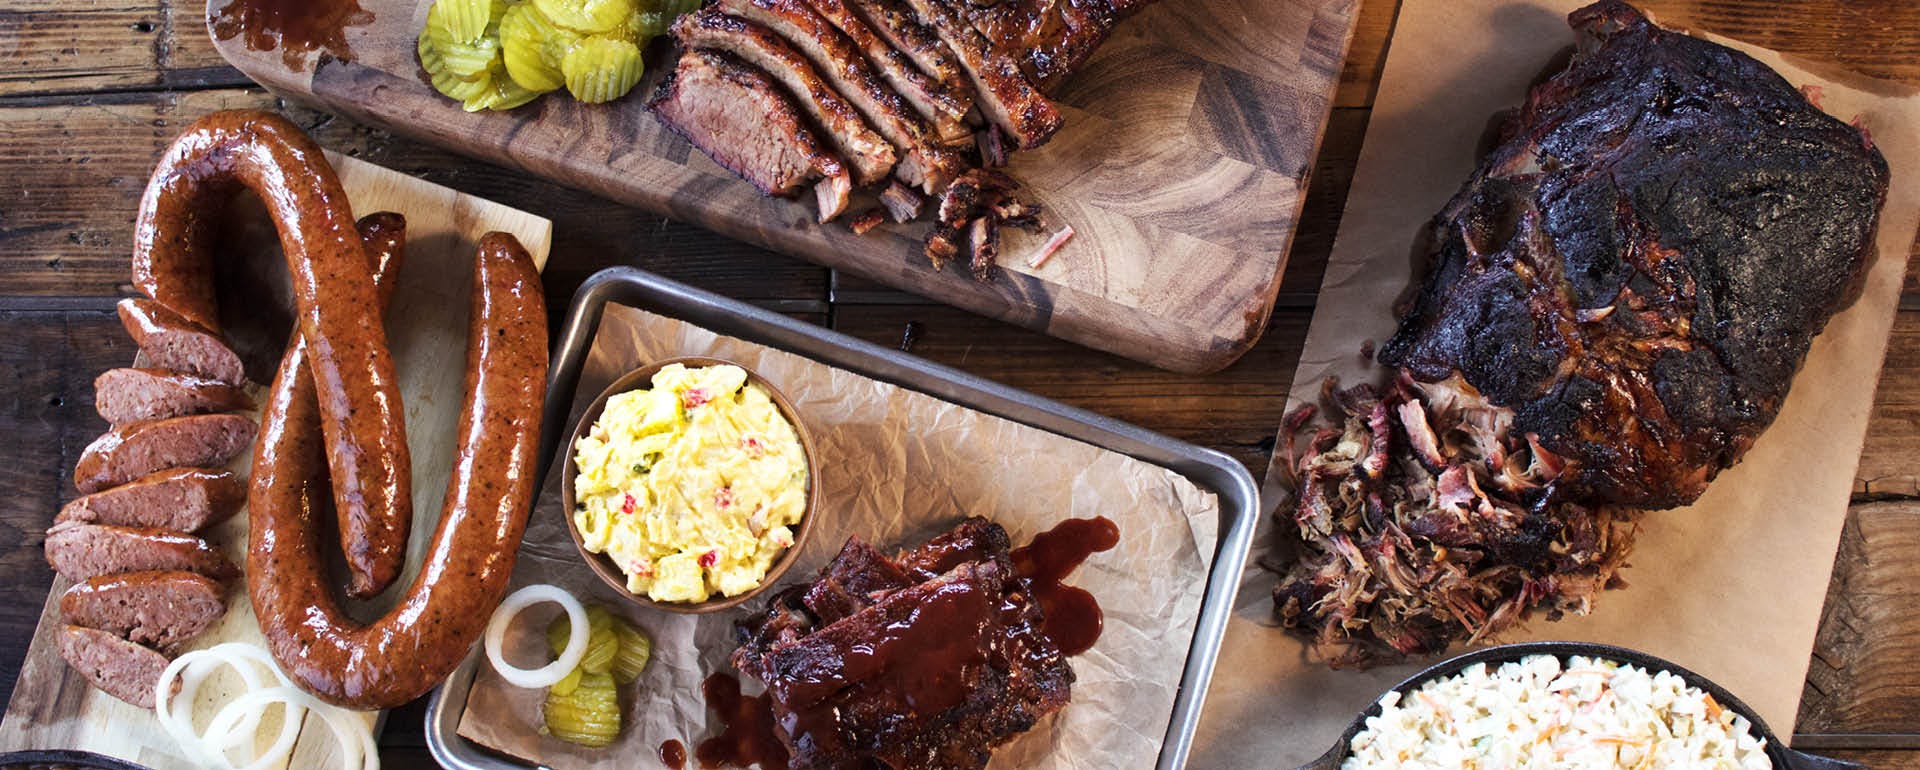 Hospitality Technology: For Dickey's BBQ, Catering Platform Serves Up Saucy Results